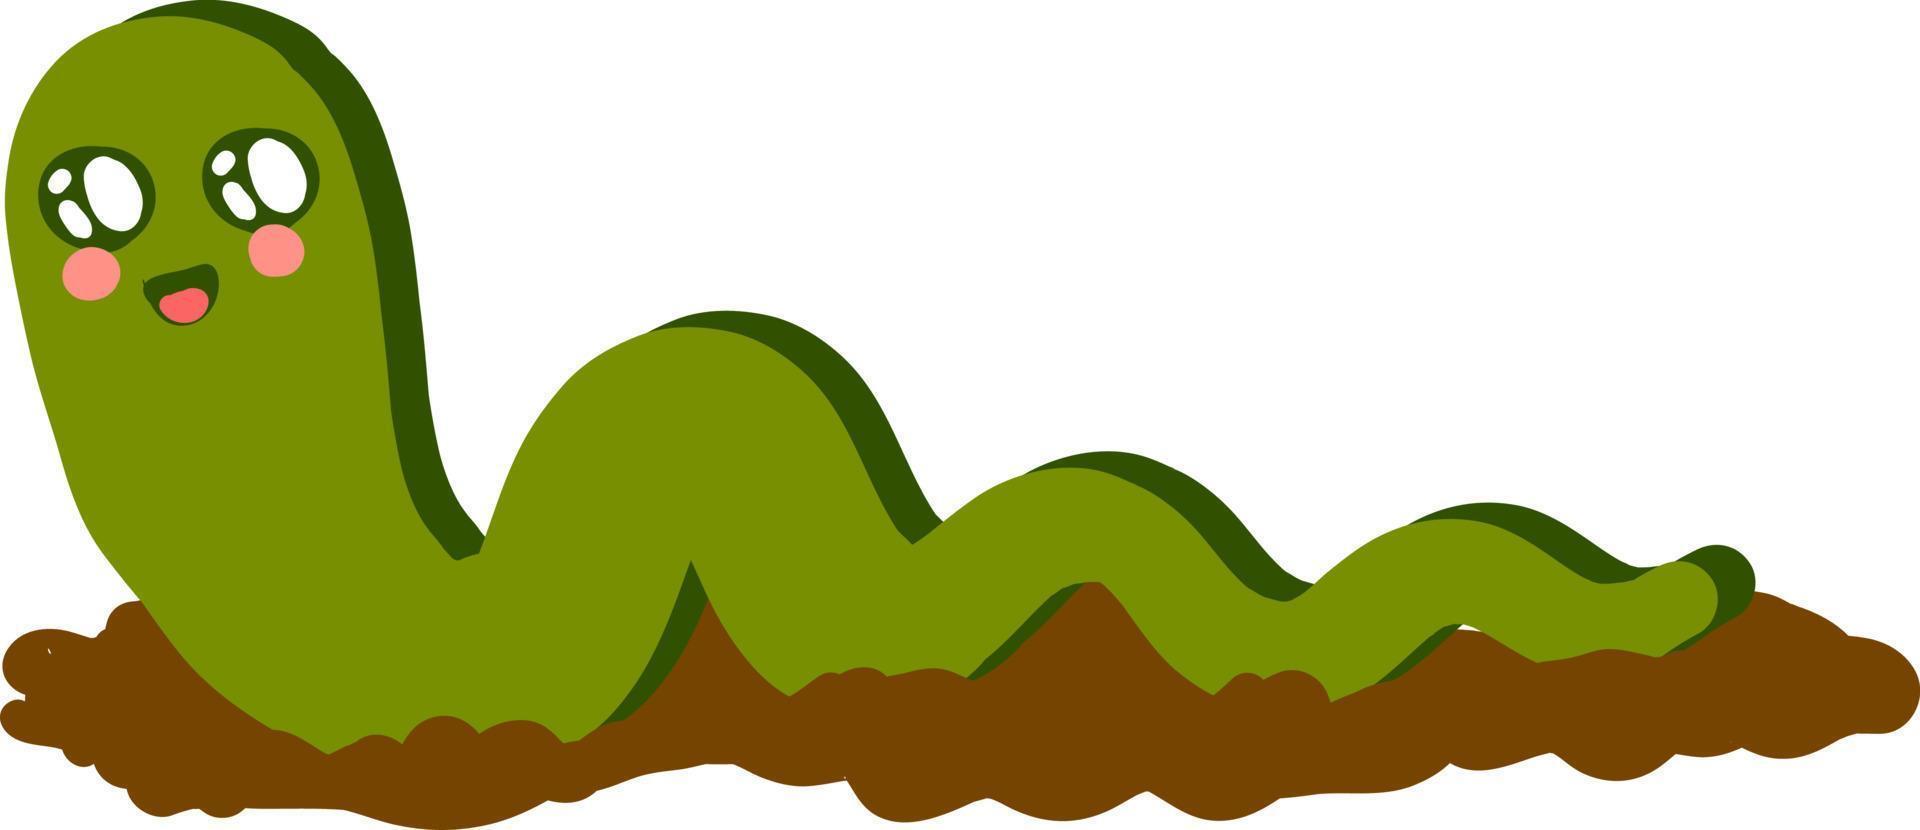 Green cute worm, illustration, vector on white background.